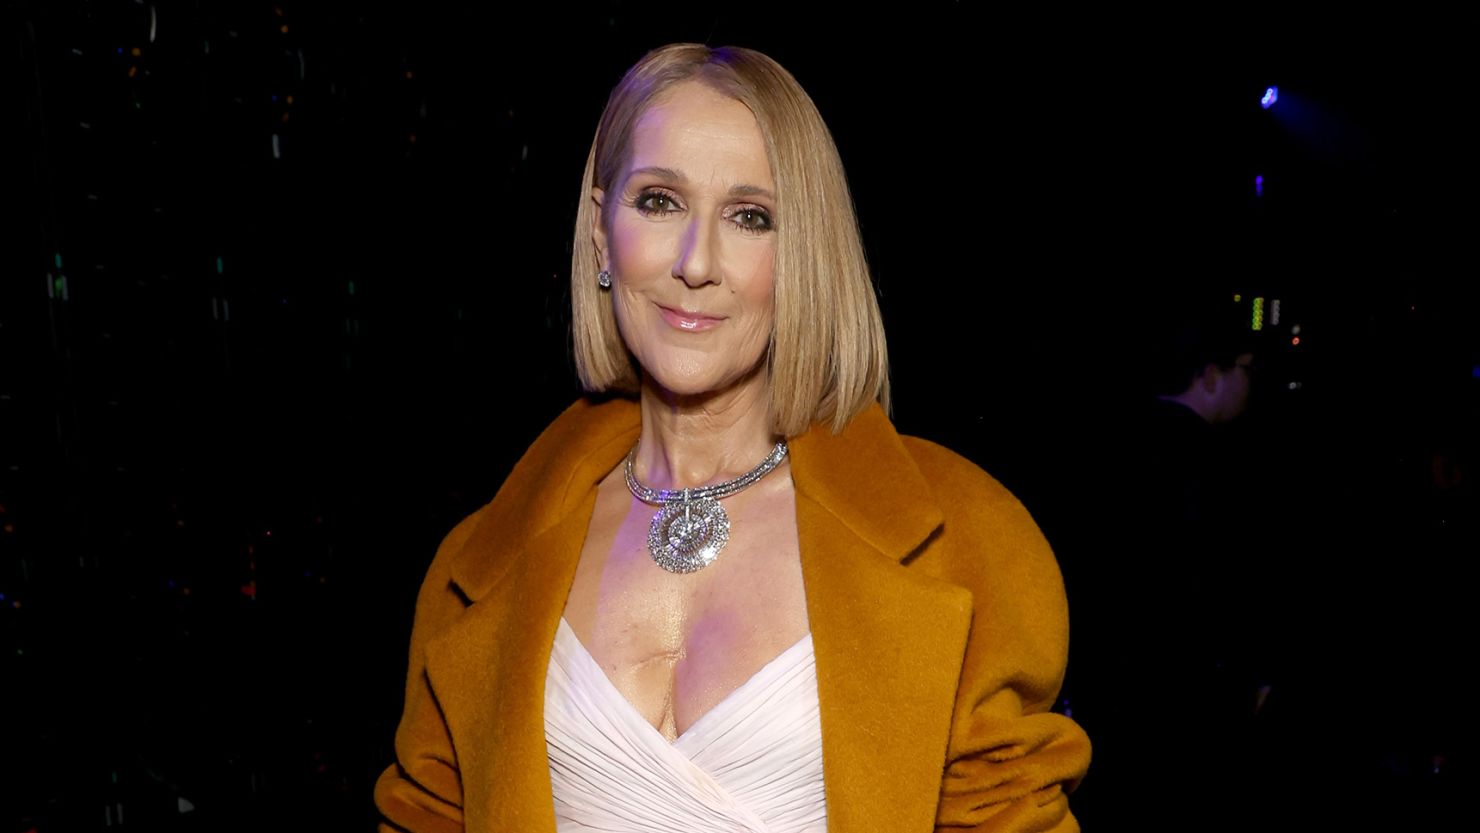 Celine Dion has opened up about living with stiff person syndrome.